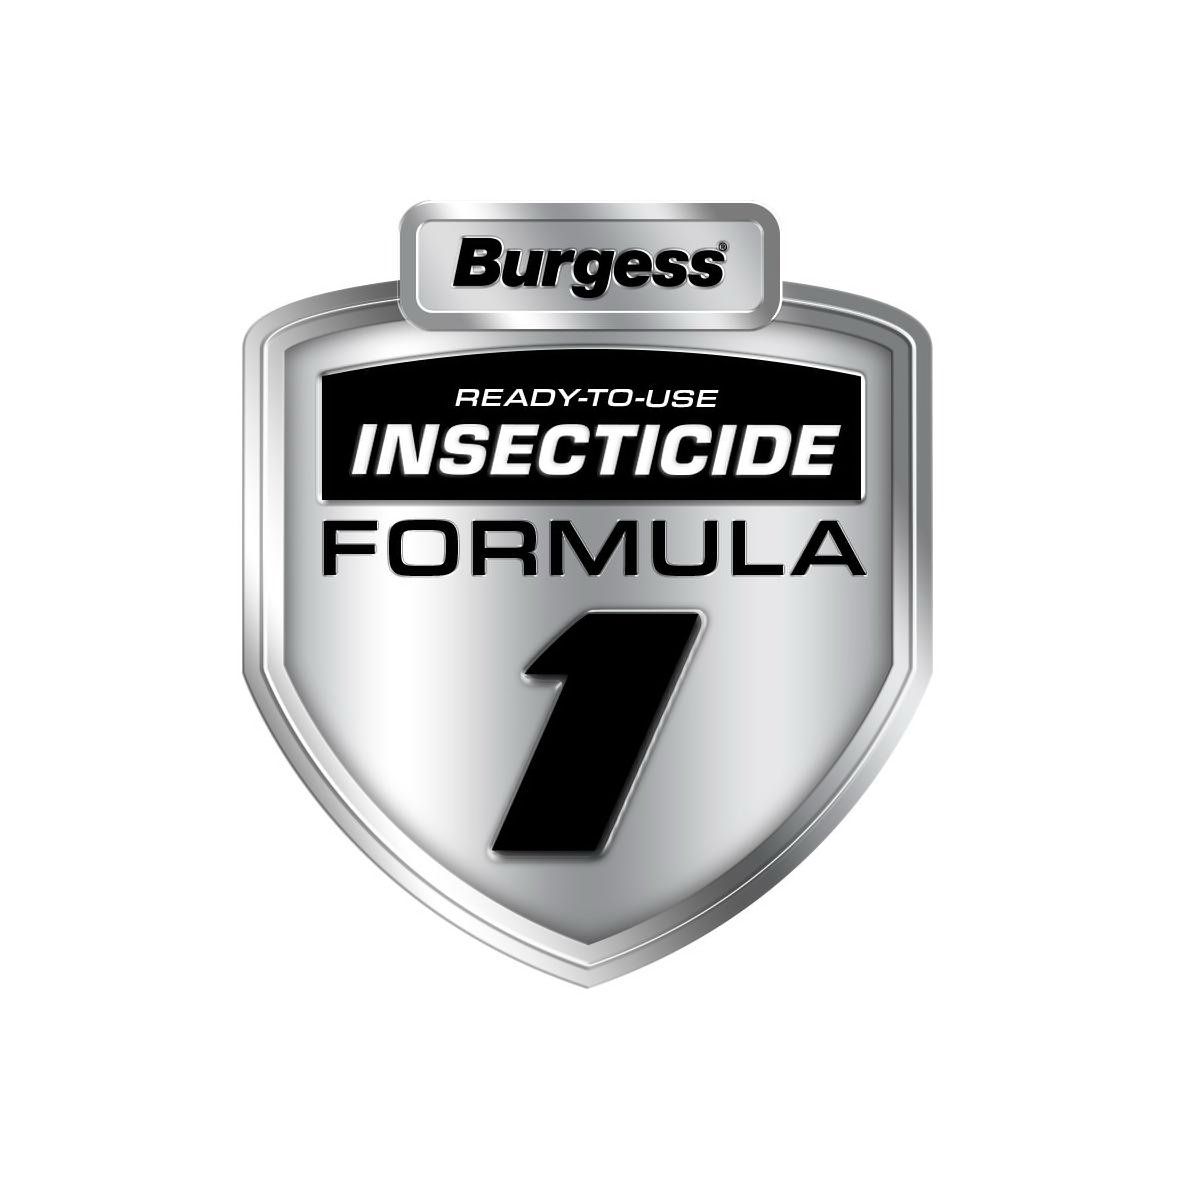  BURGESS READY-TO-USE INSECTICIDE FORMULA 1